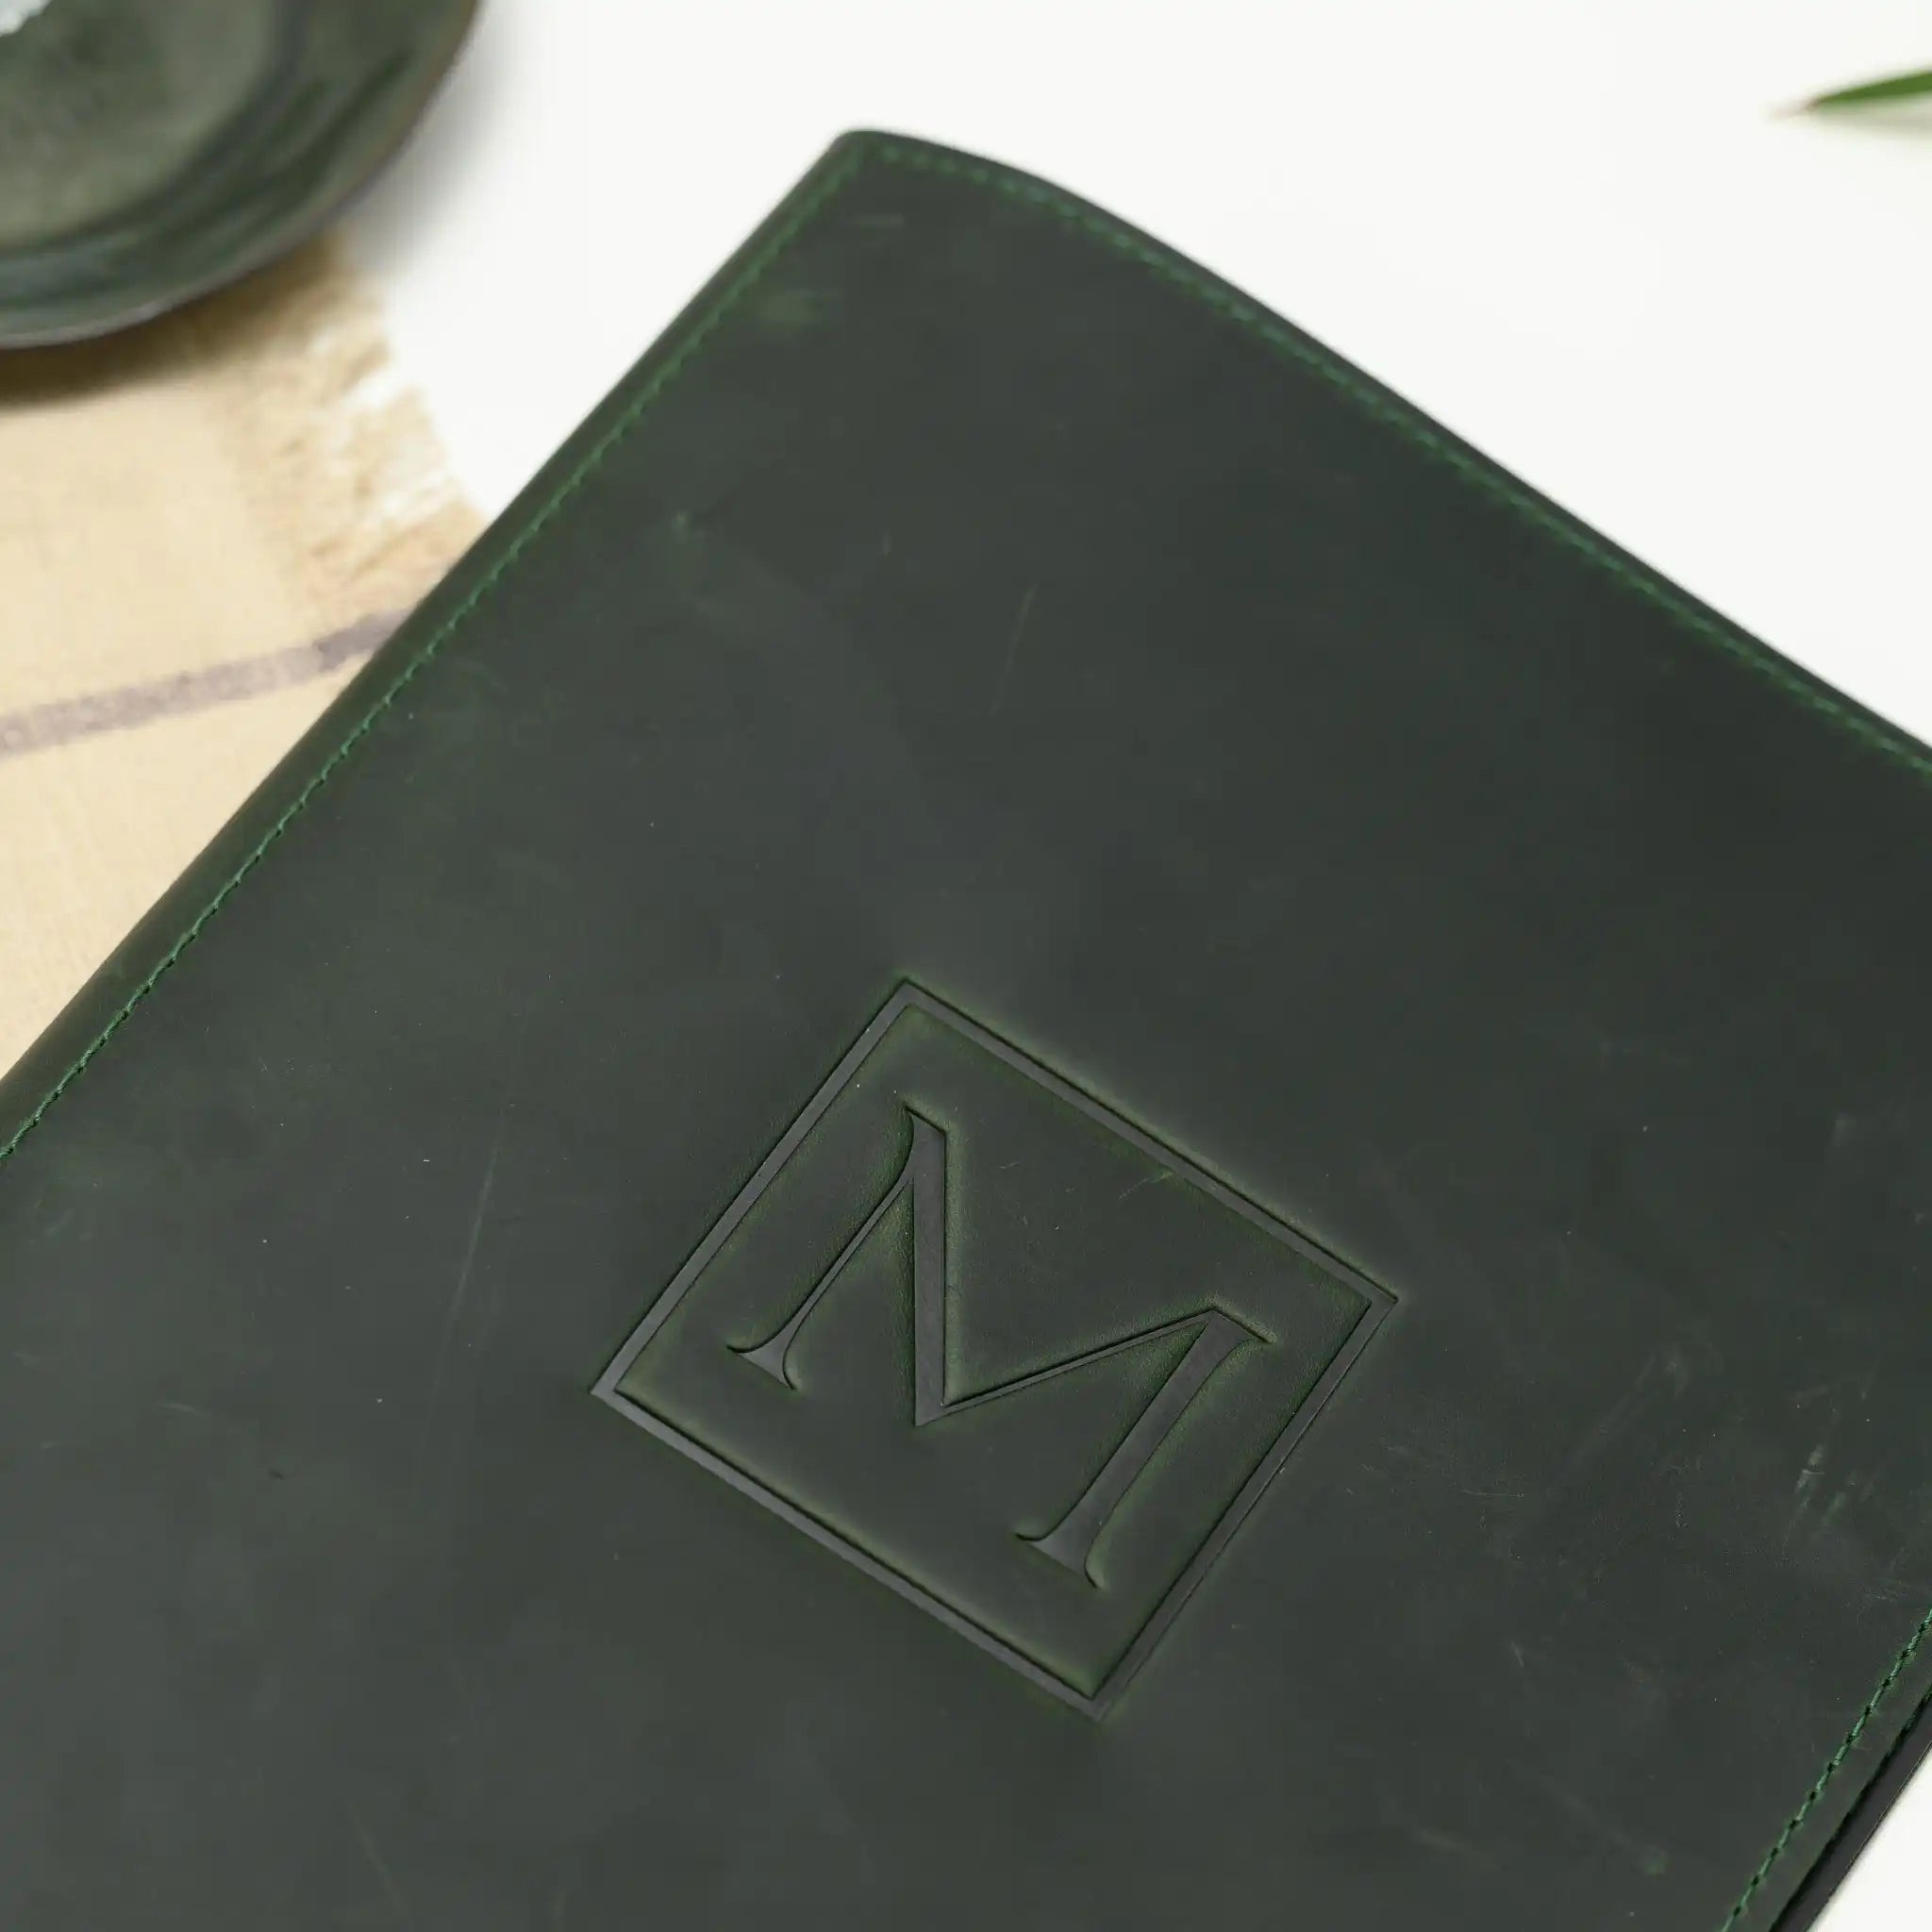  Customize your menu with our personalized cover, reflecting your unique brand identity and charm.